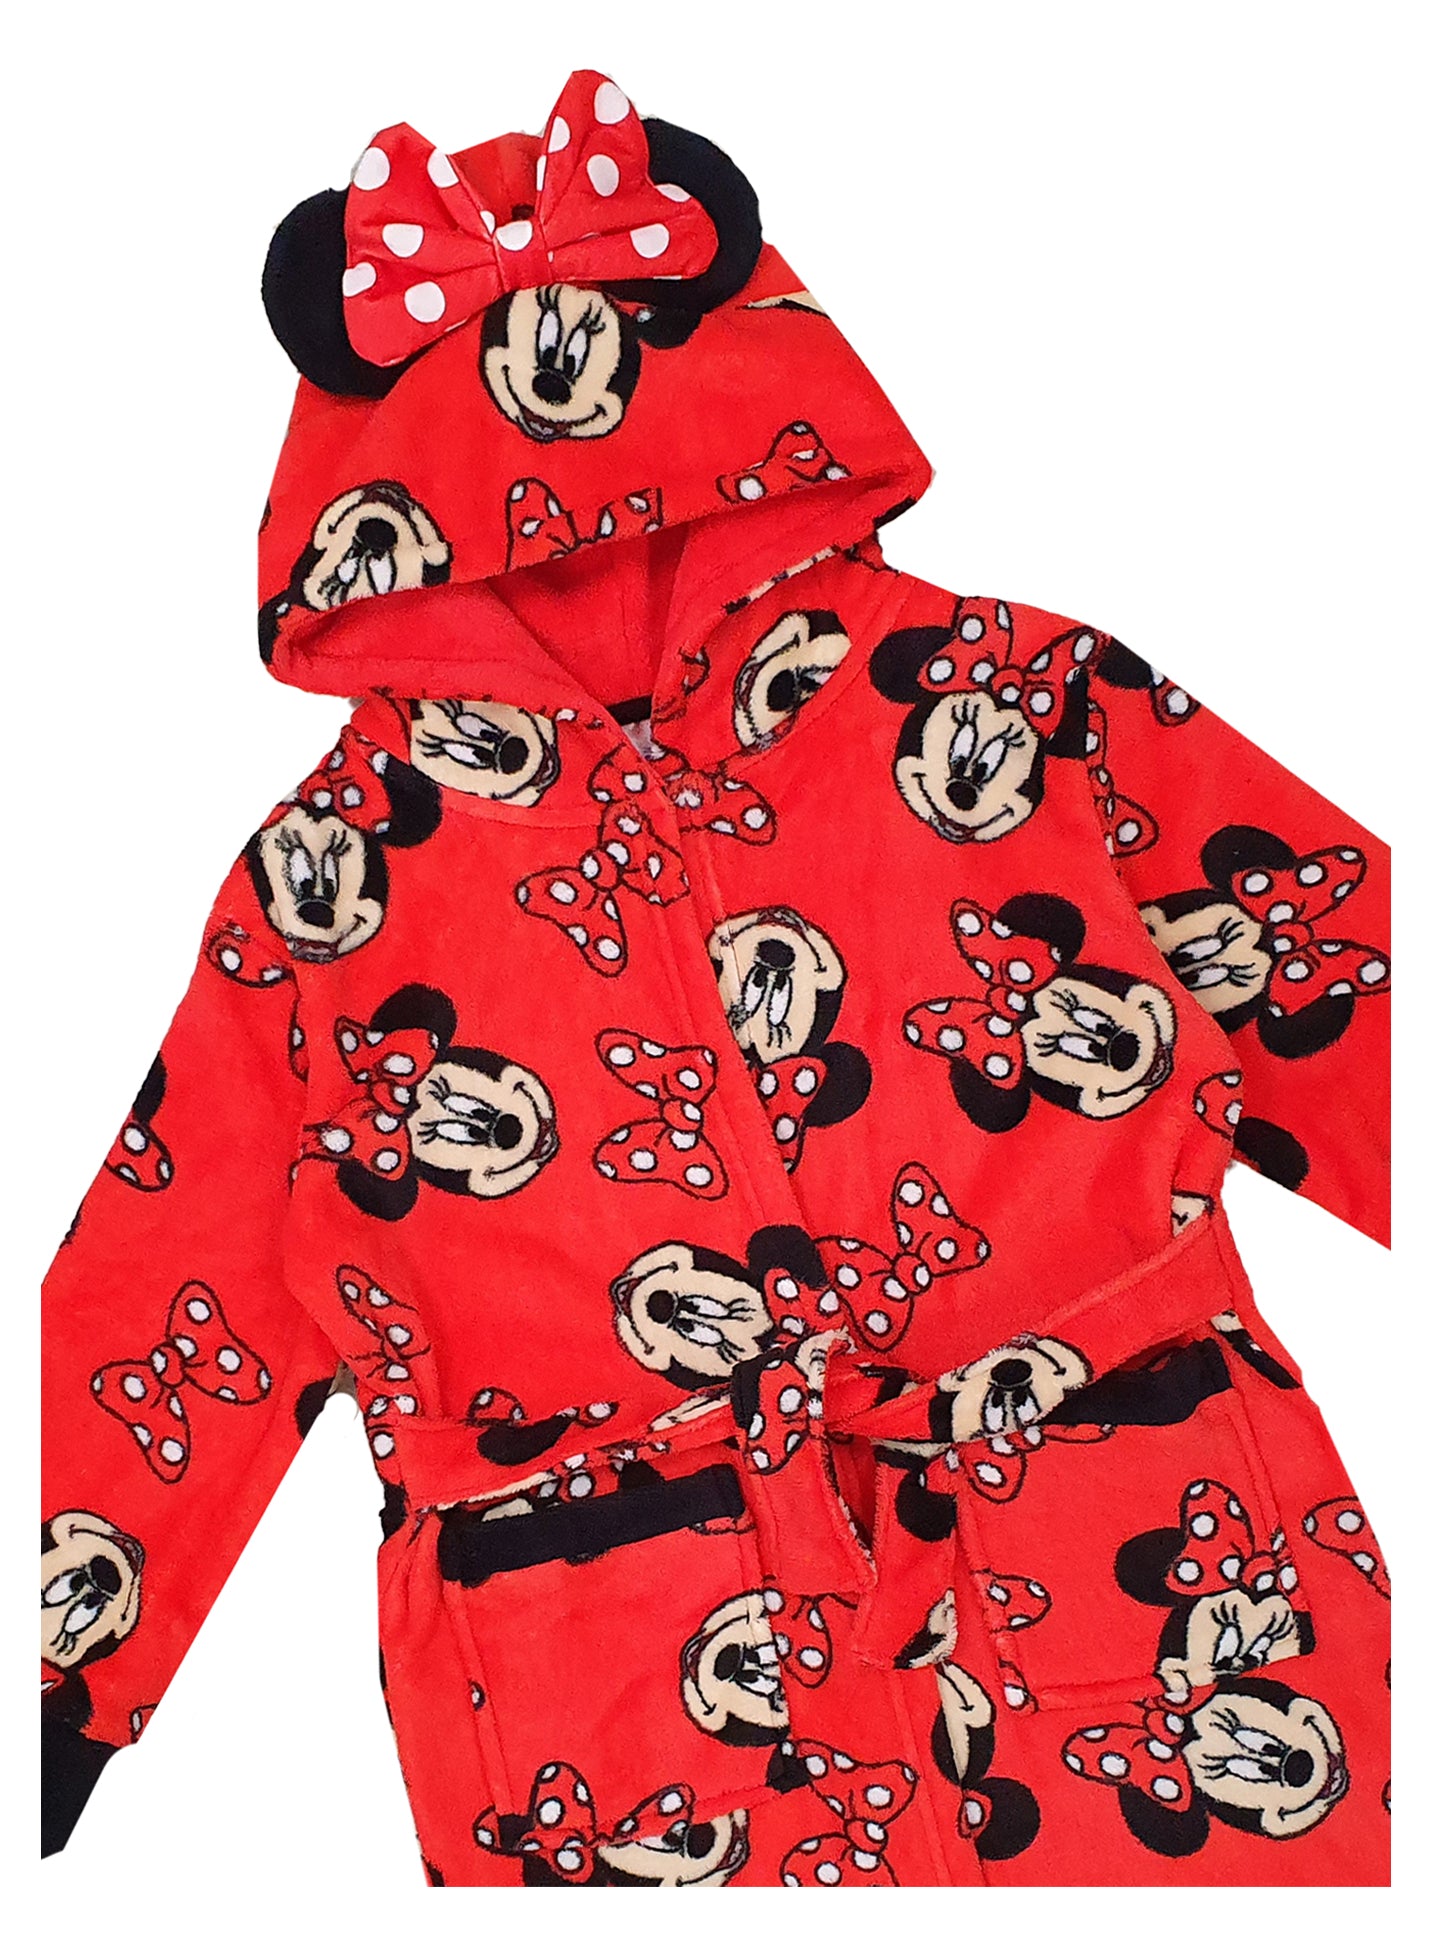 Girls Disney Minnie Mouse Dressing Gown Robe